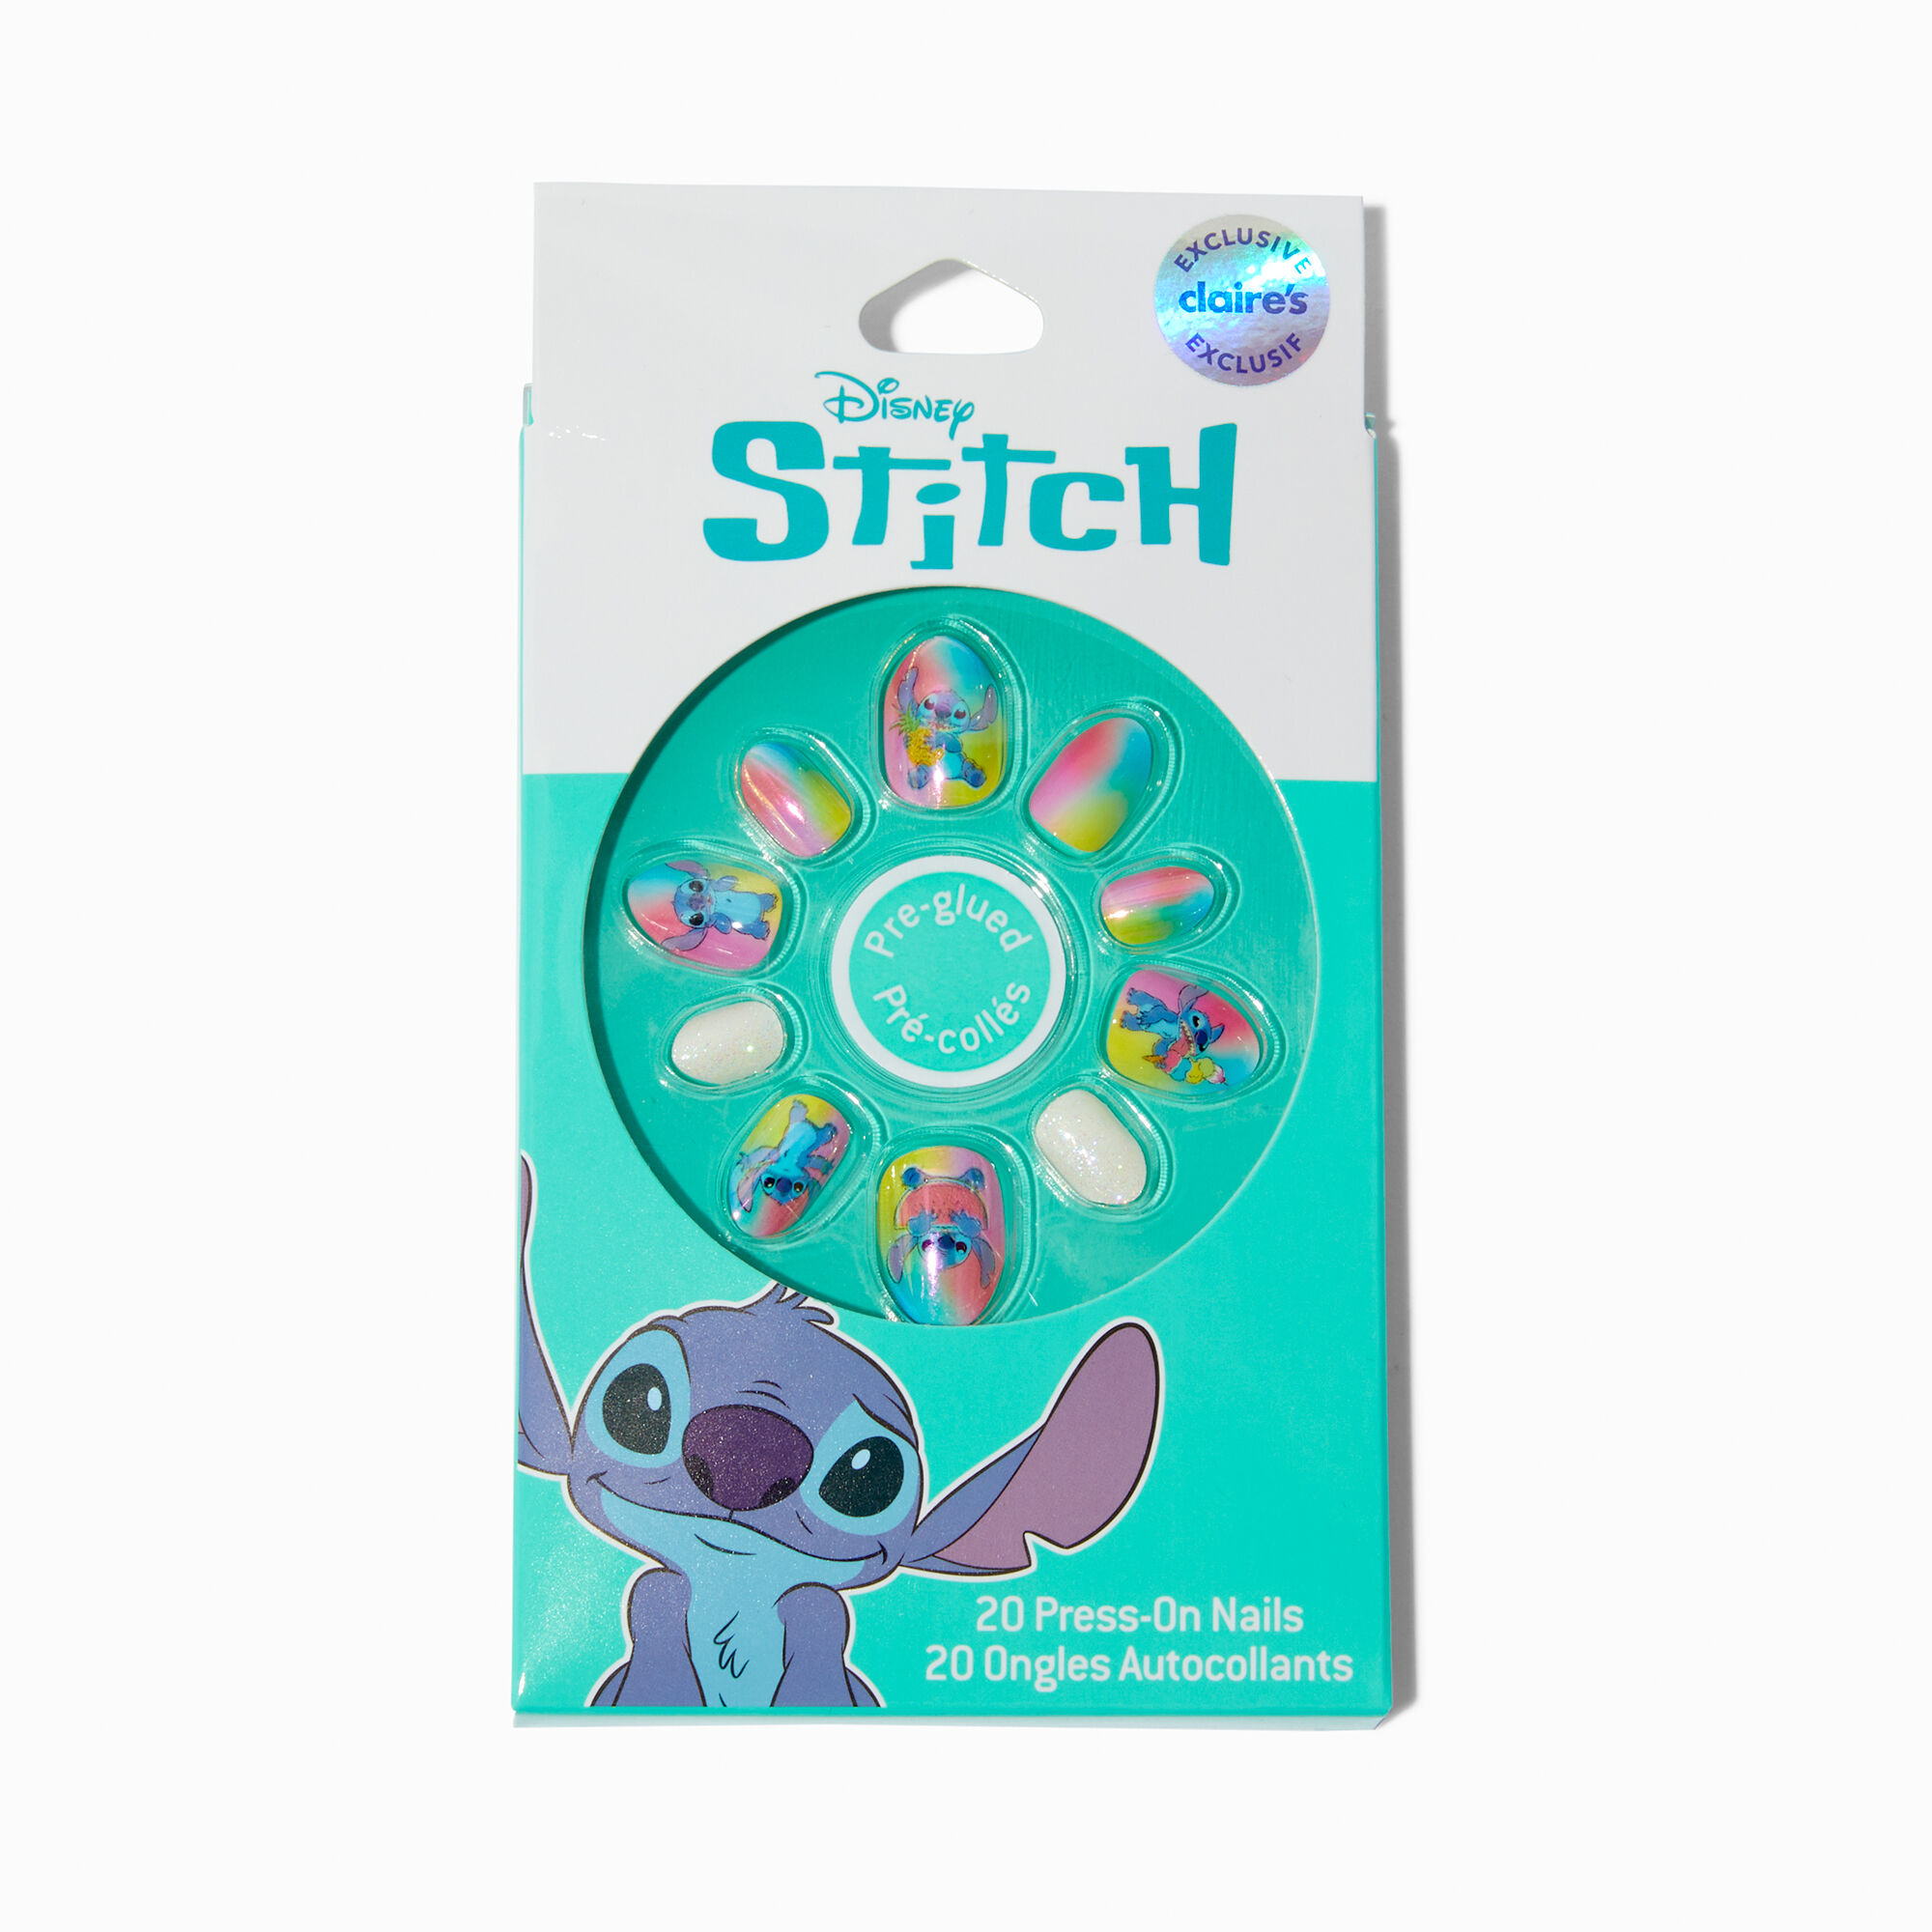 View Disney Stitch Claires Exclusive Foodie Stiletto Press On Faux Nail Set 20 Pack information